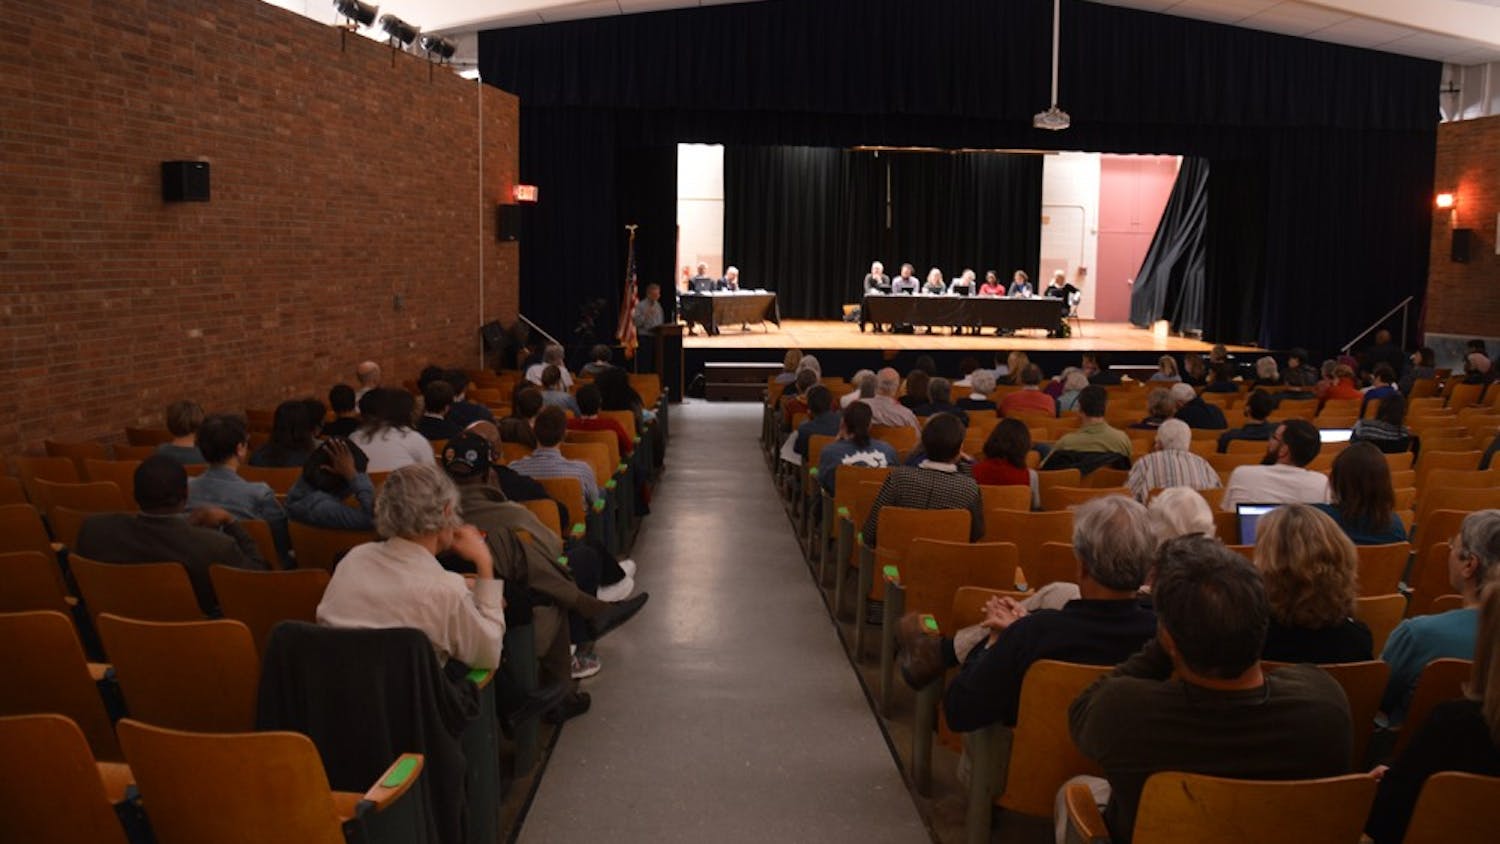 On March.22, 2016 Carrboro Board of Aldermen Public Hearing of the IFC's FoodFirst Meeting is held at the Carrboro Elementary School Auditorium.  